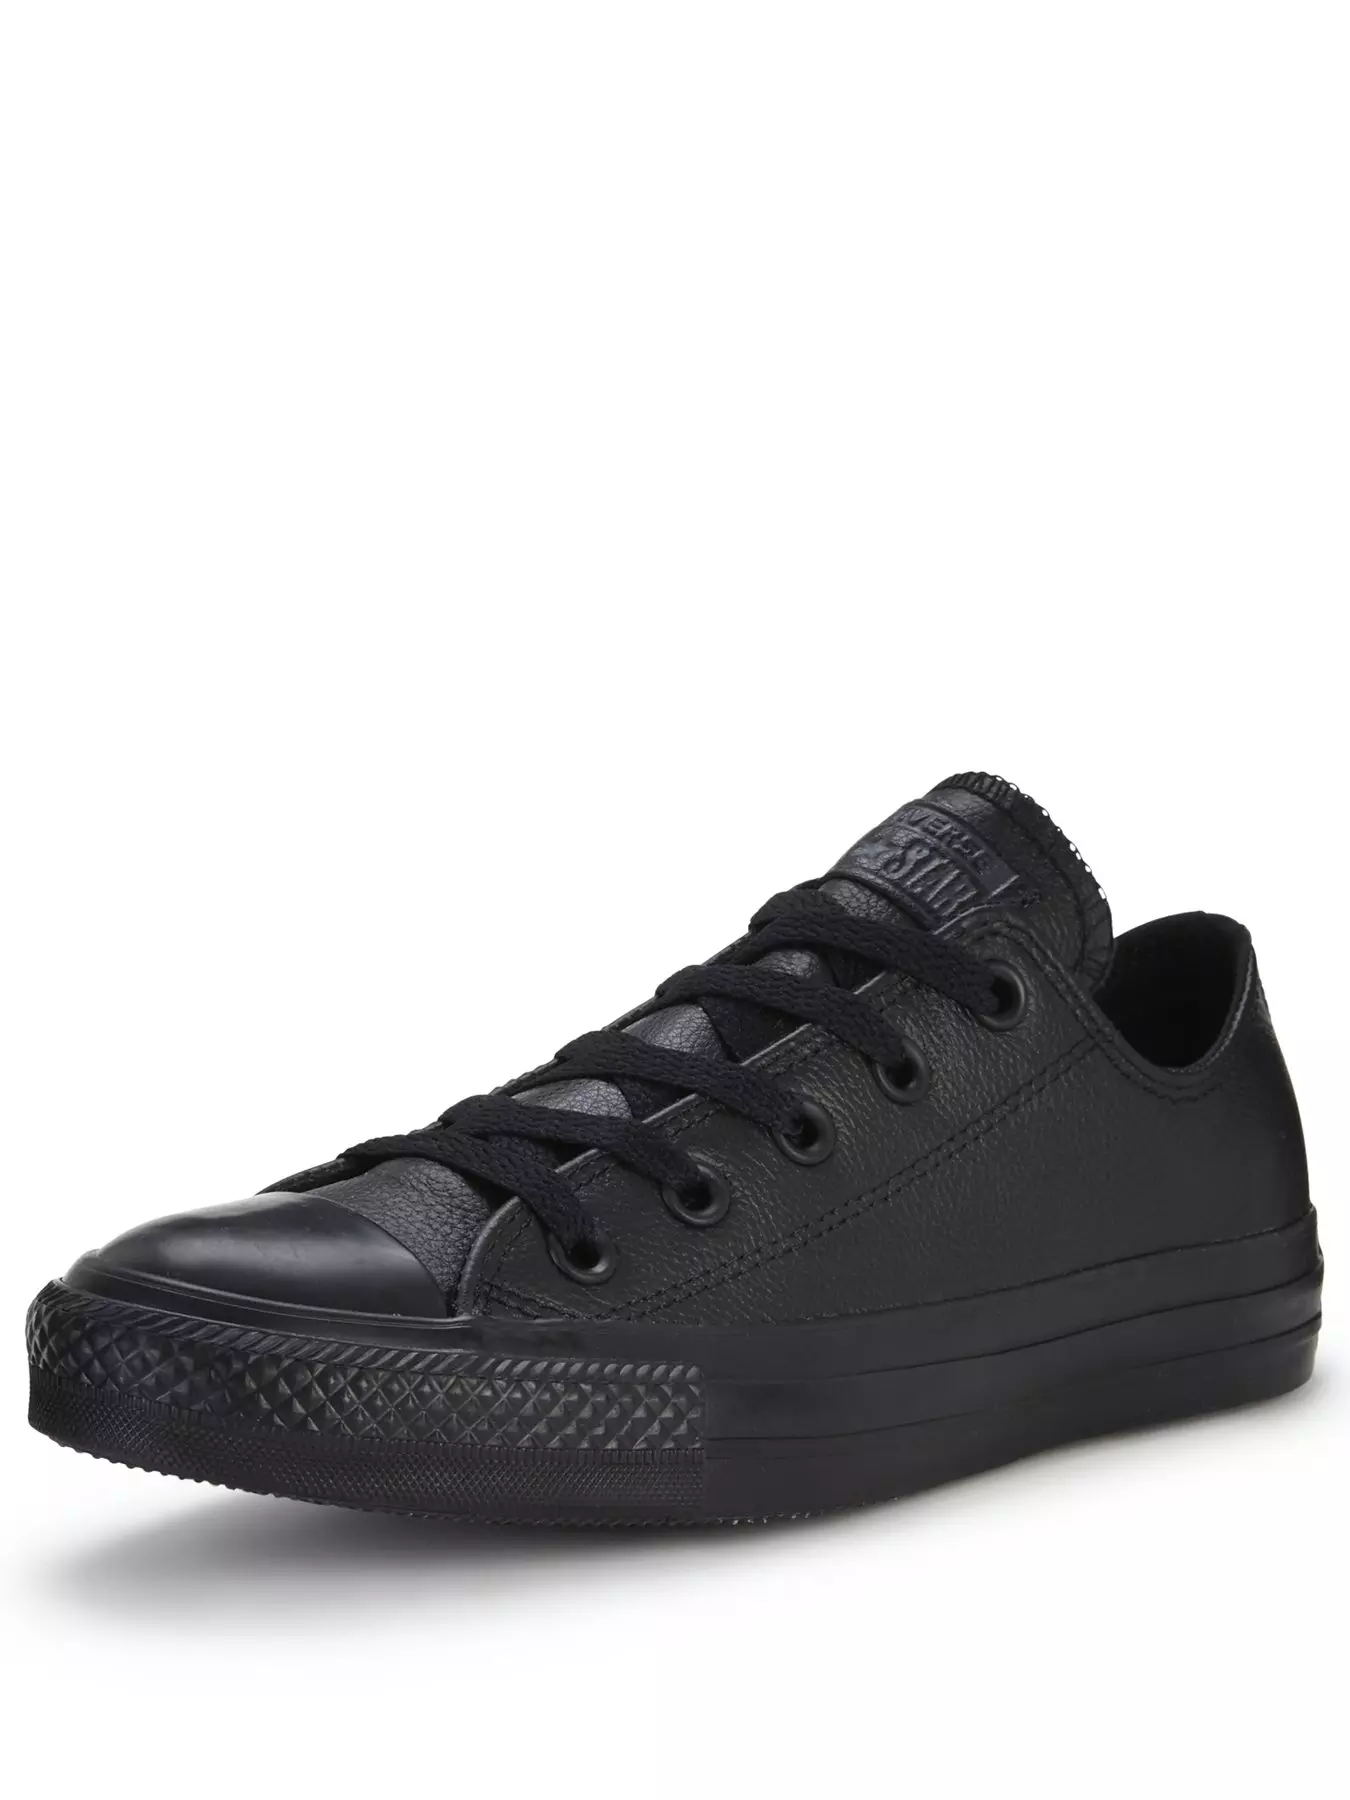 Women's Black Converse Trainers All Black Very.co.uk